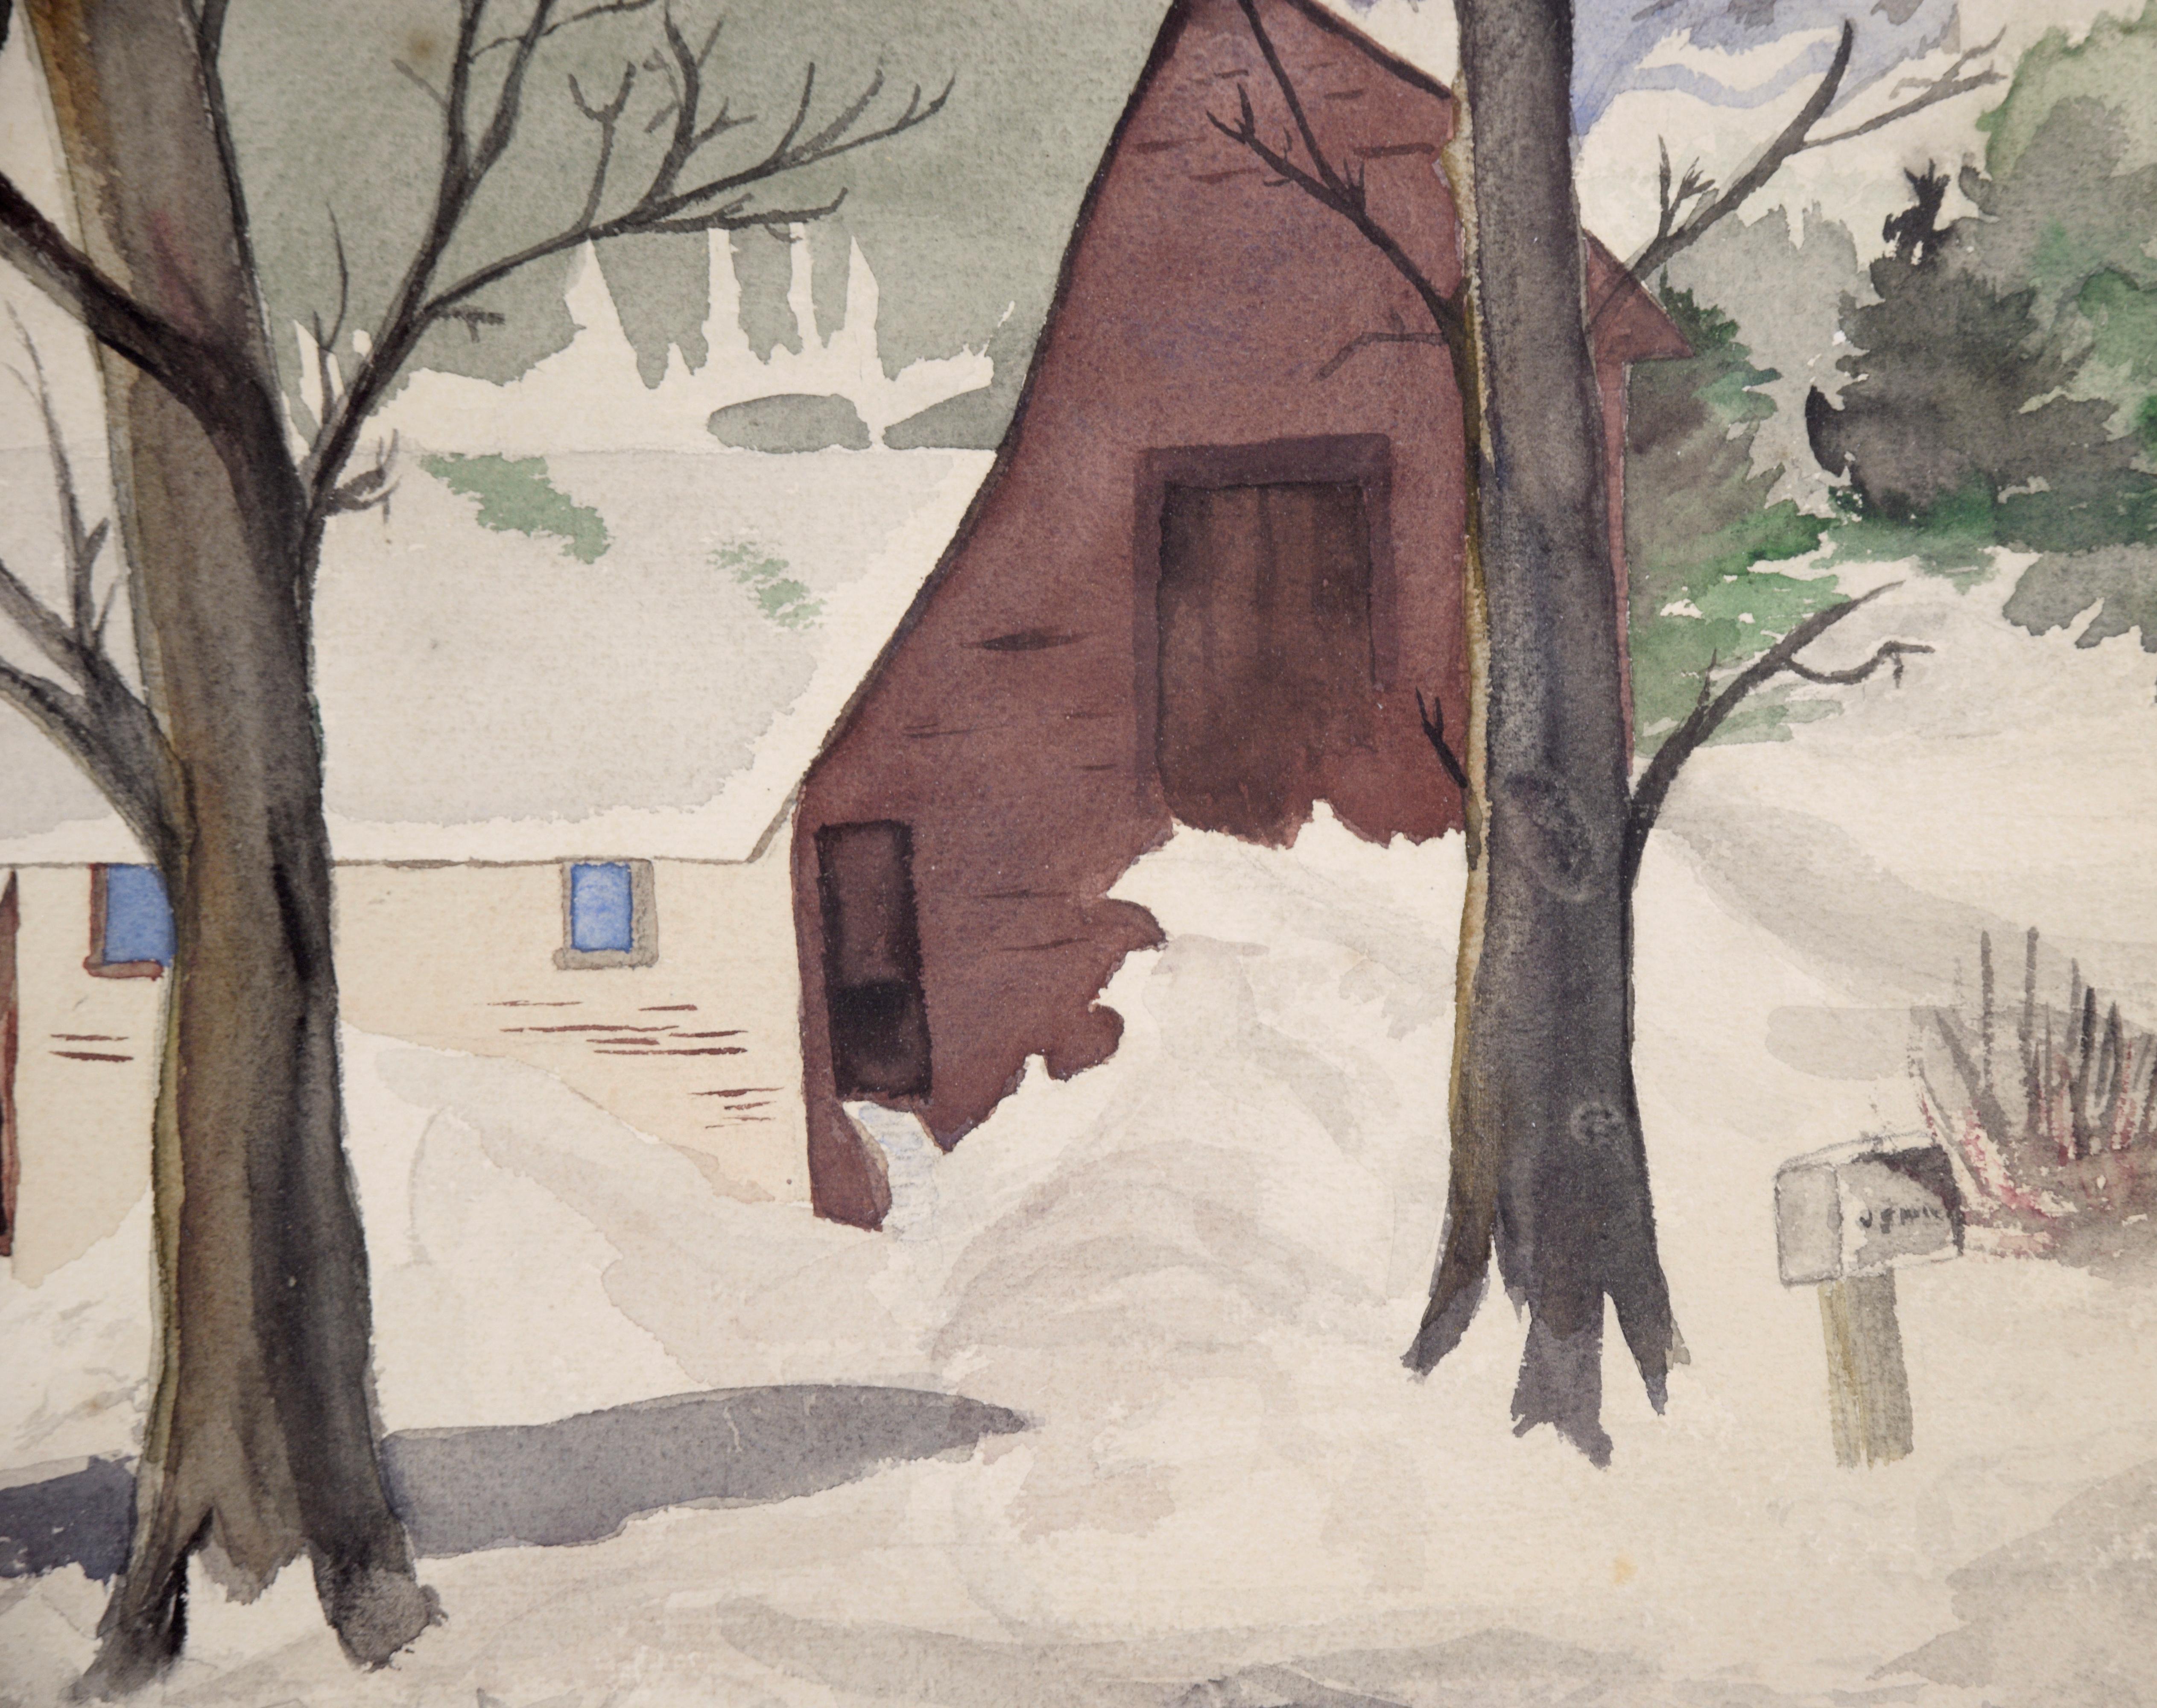 Snowy landscape by Maine artist Fannie Mae Cunningham (American, 20th Century). Tags on verso from previous backing have been preserved. Presented in a new grey-blue mat with a wood frame and glass. Image size: 16